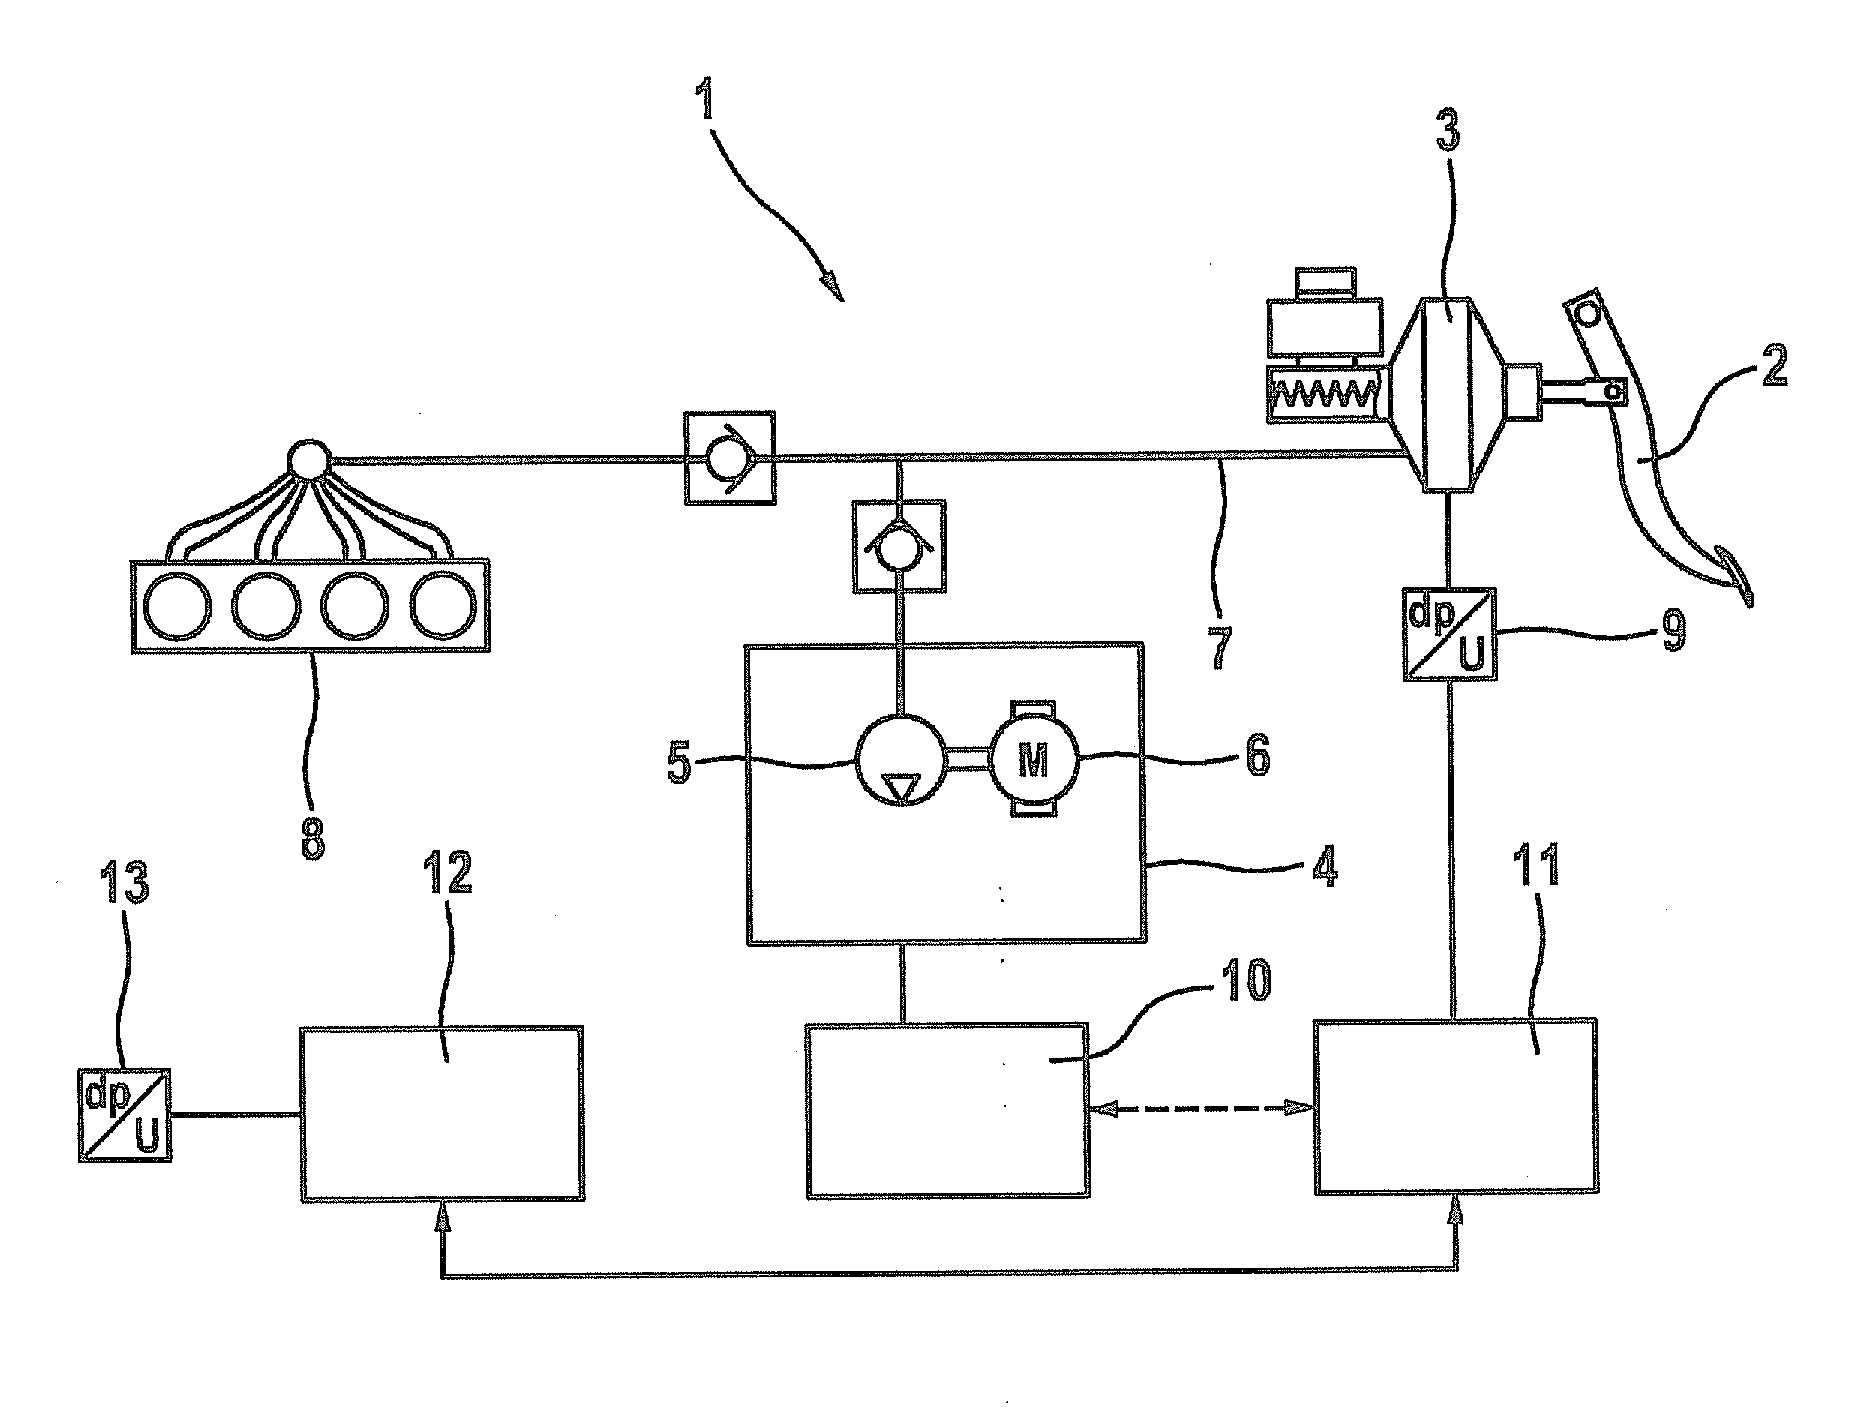 Method for monitoring the operation of a vacuum pump in a brake system